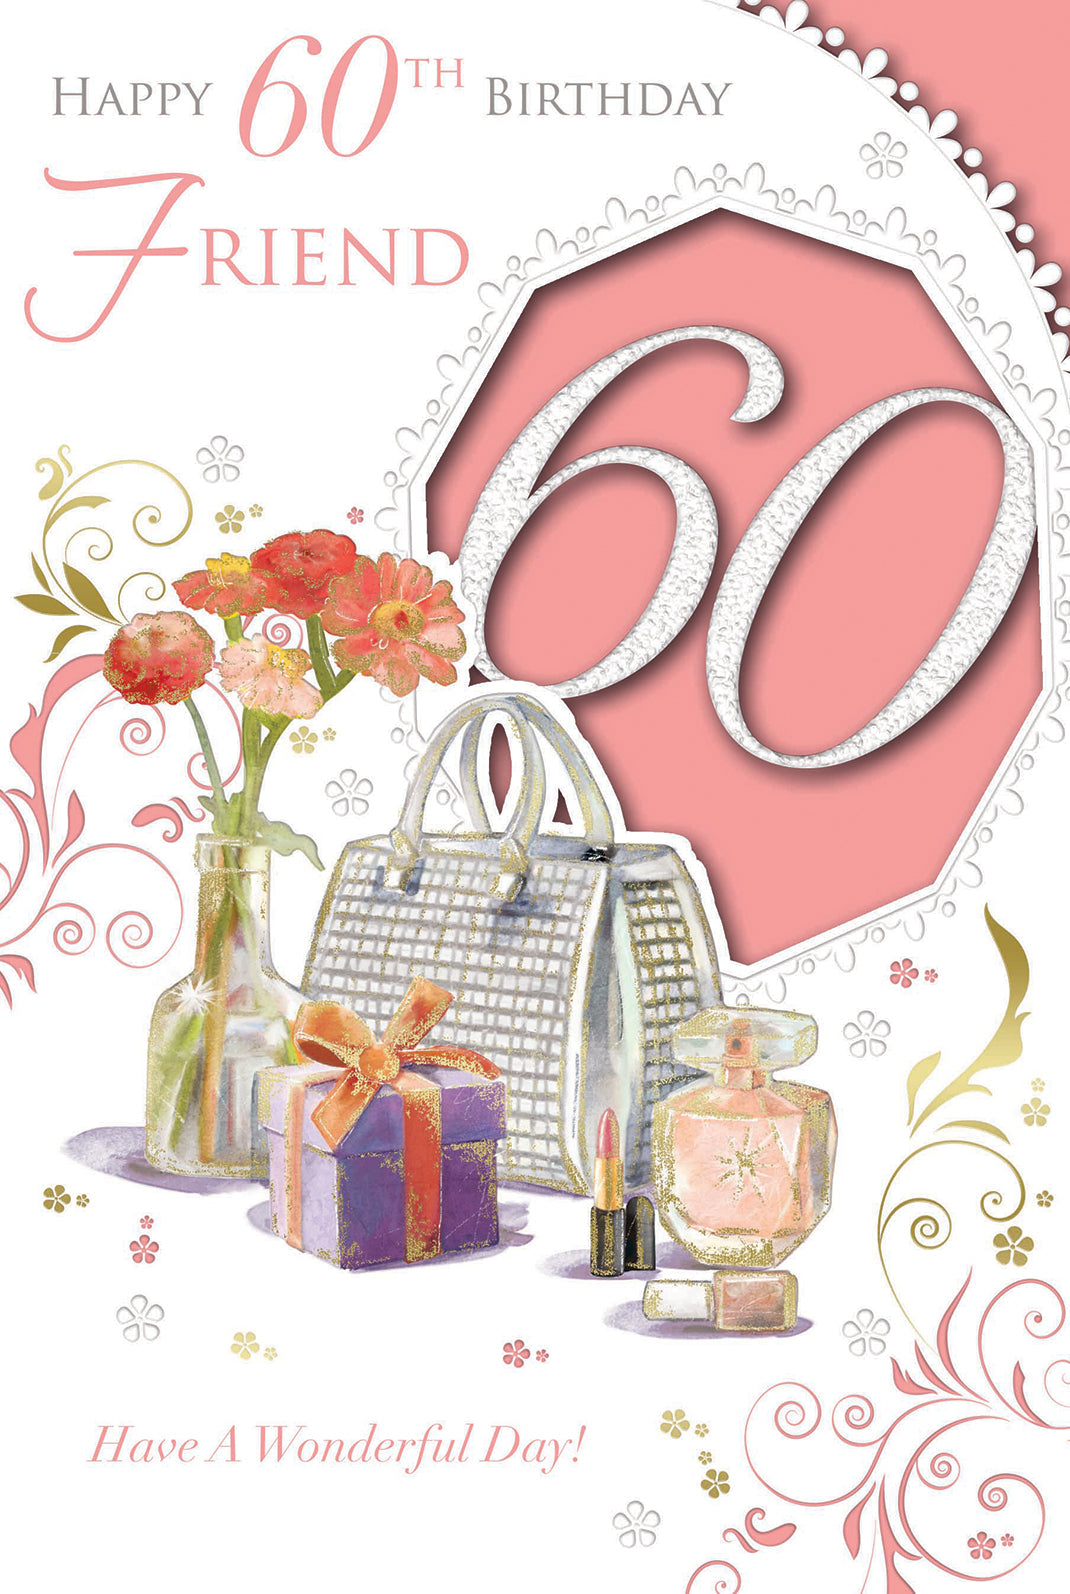 How To Write A 60th Birthday Card